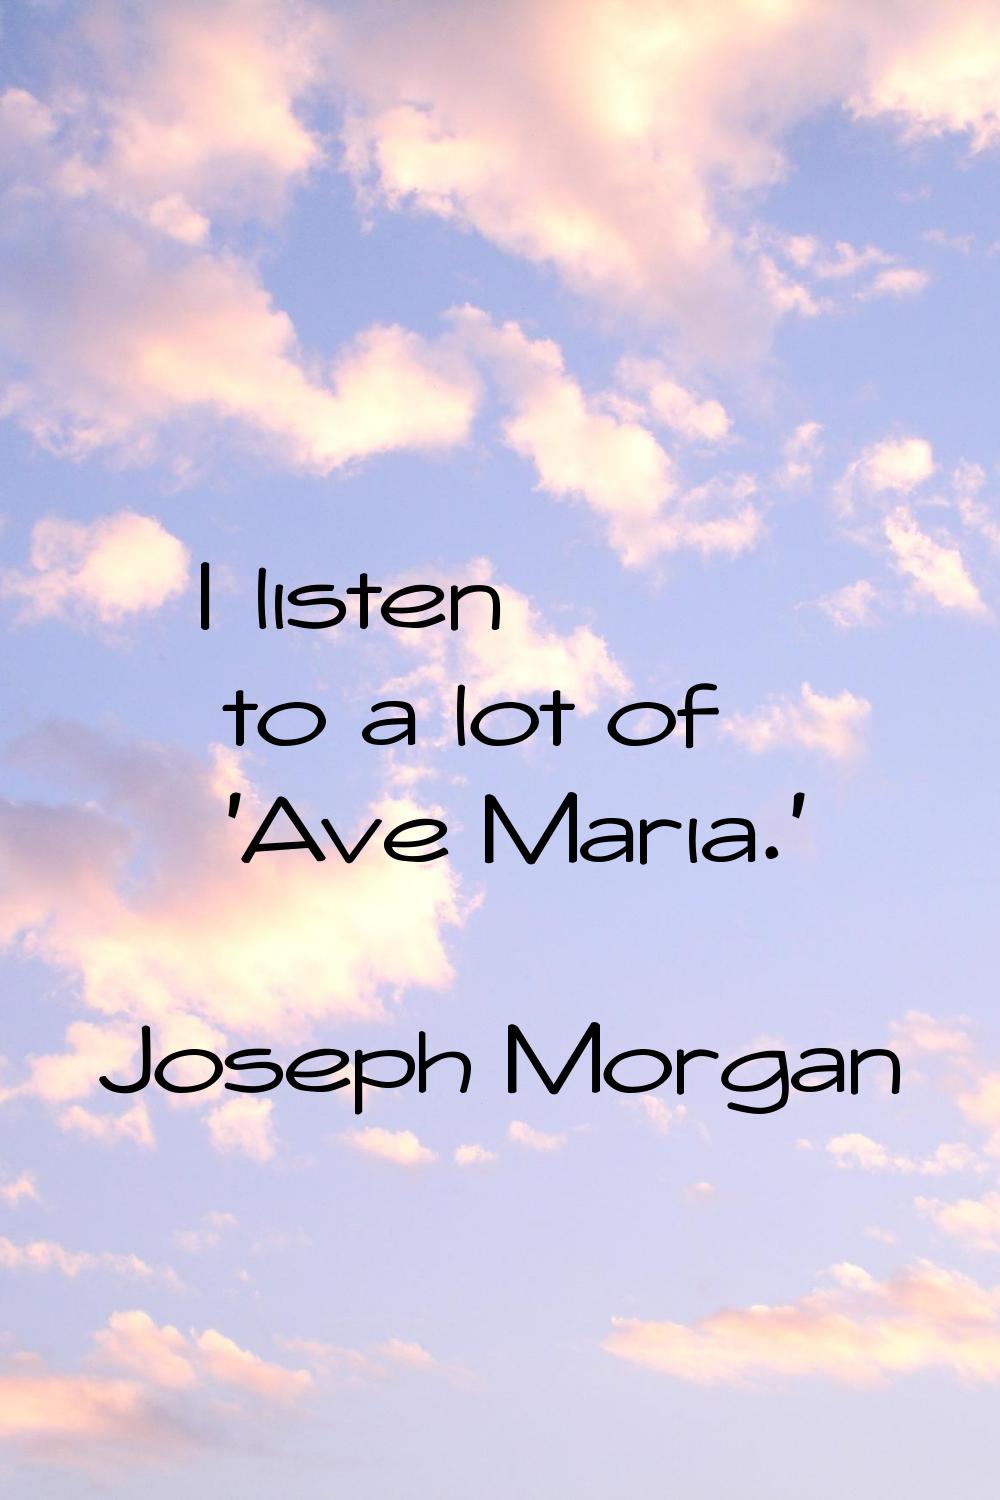 I listen to a lot of 'Ave Maria.'